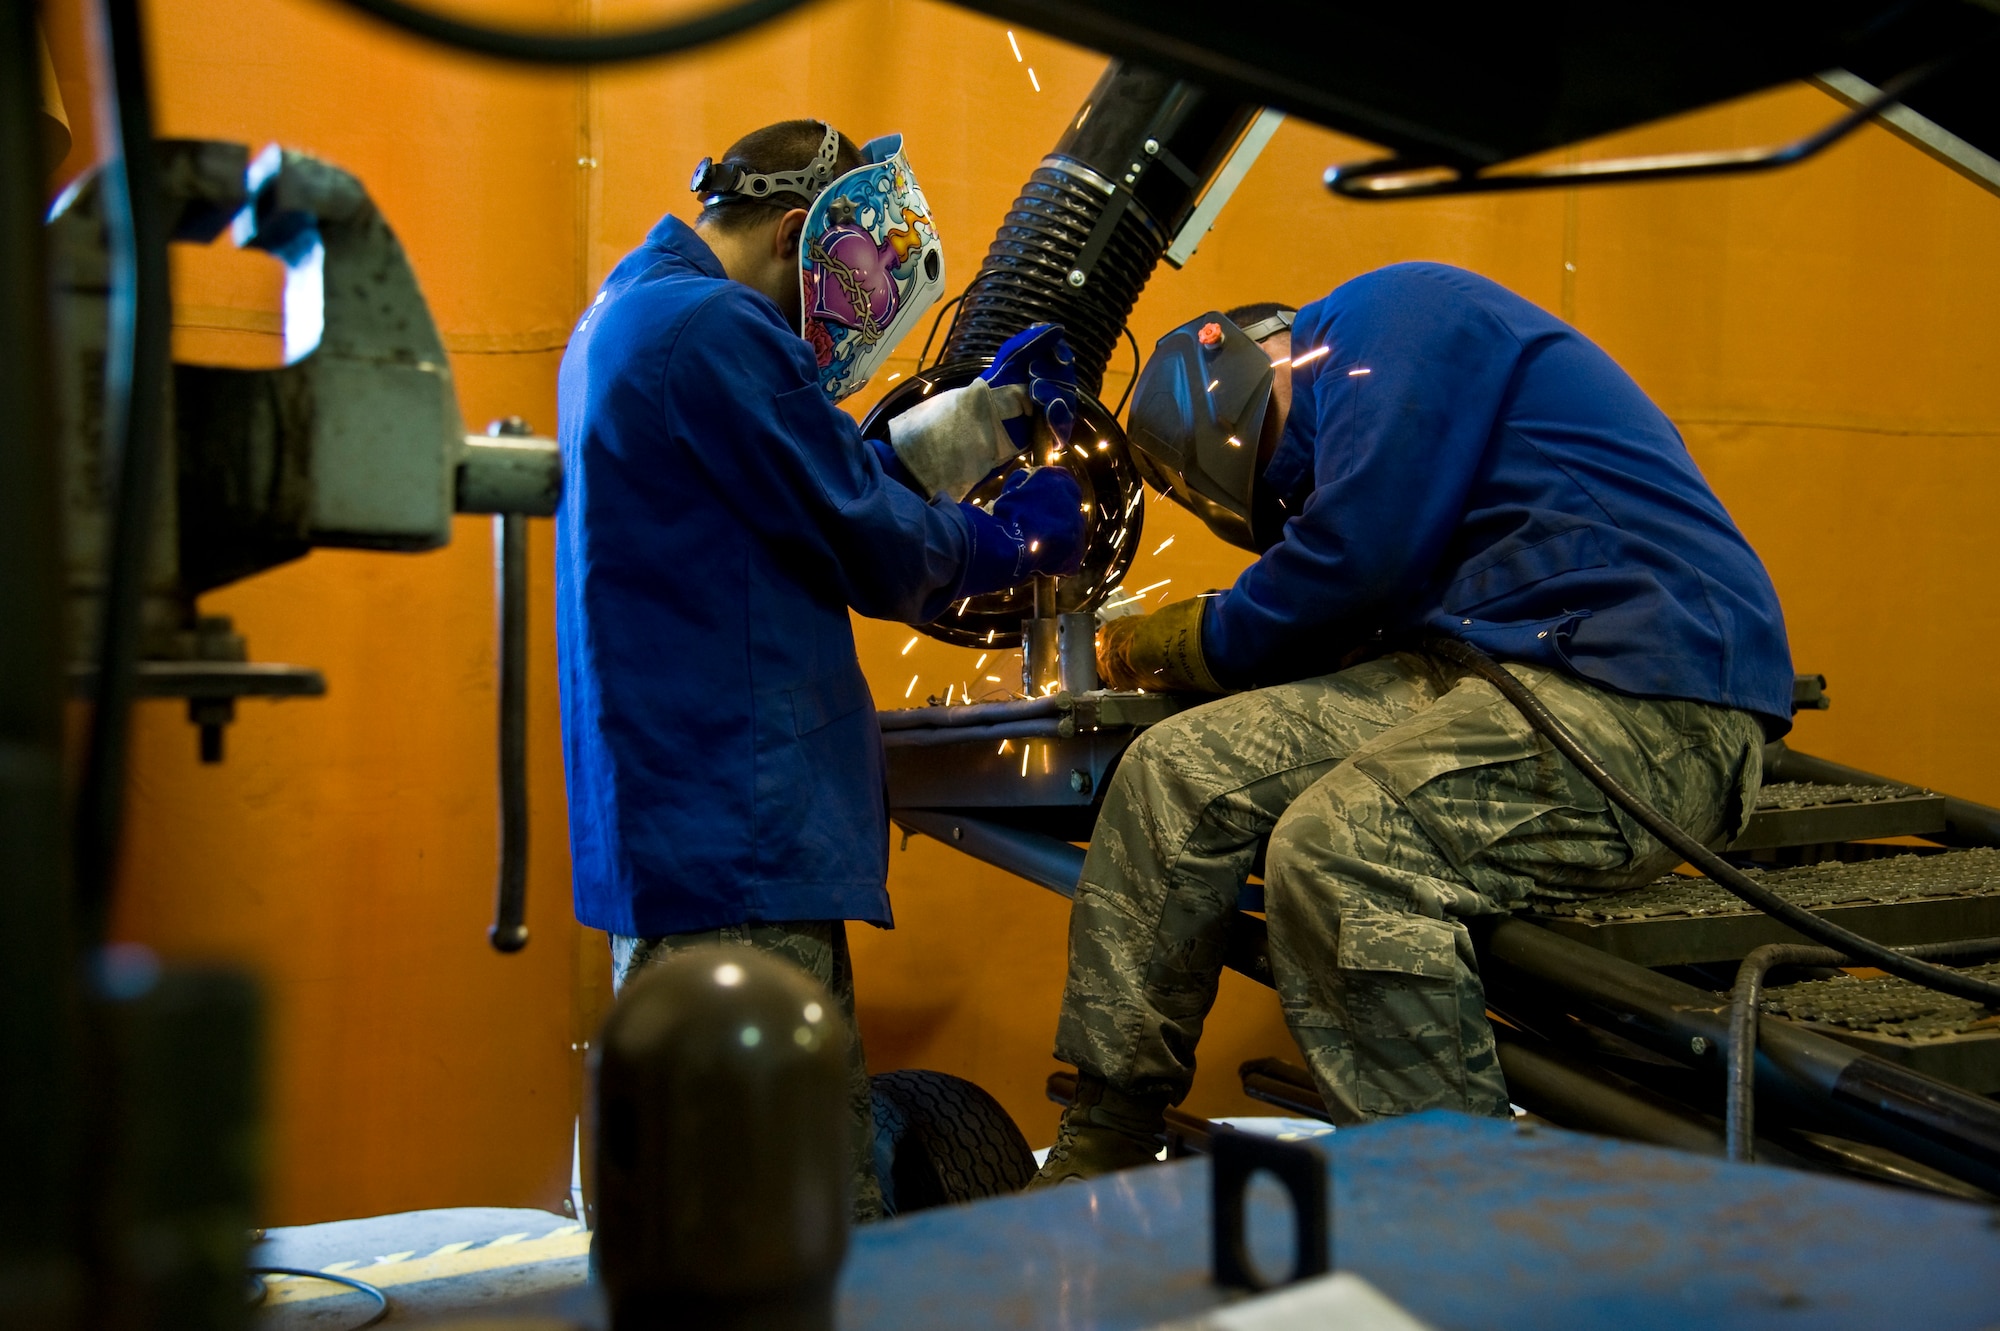 Airmen 1st Class’ Logan Stebenne (left) and Abraham Vidulich, 22nd Maintenance Squadron fabrication flight metals technicians, repair a B1 stand Sept. 26, 2013, at McConnell Air Force Base, Kan. Metals technicians work in pairs when welding as a safety measure and to increase the accuracy. (US Air Force photo/Airman 1st Class John Linzmeier)